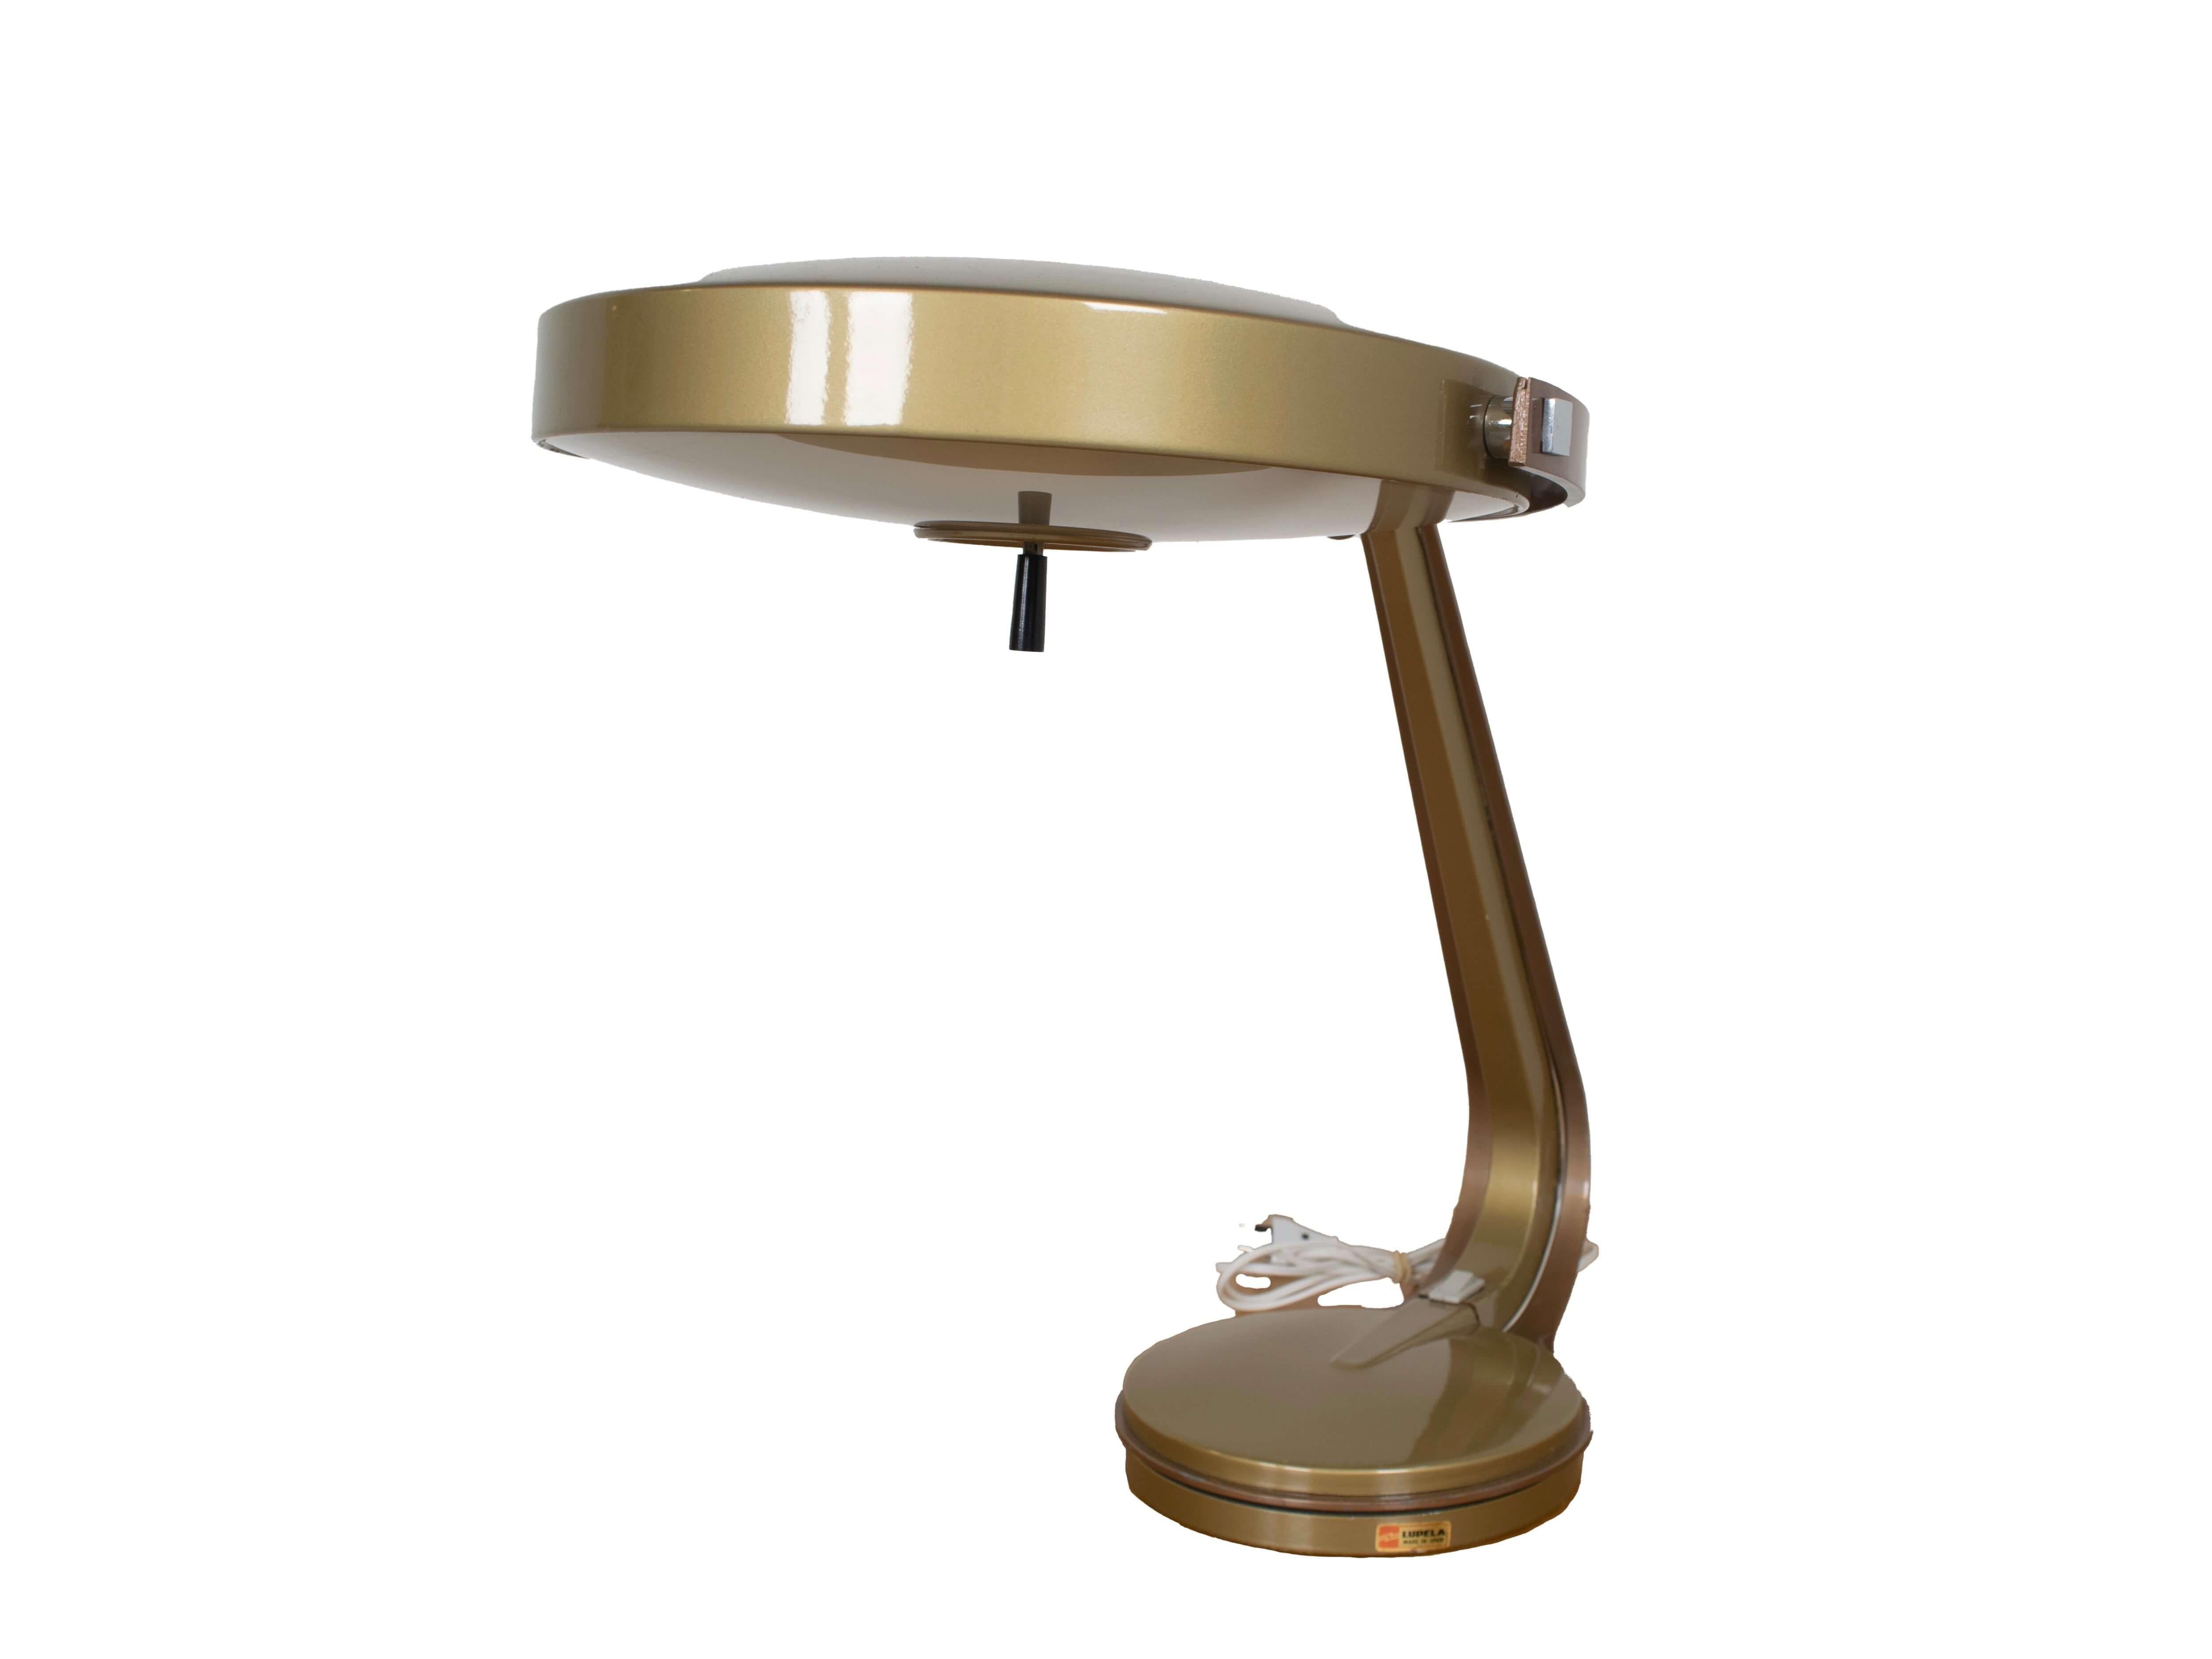 Stunning Fase Madrid ‘Lupela Rey’ table lamp, Spain 1960s. This bronze colored lamp is made of acrylic and metal. The shade of the lamp is flexible to move. It has a white button on the foot. The lamp is clearly marked with a sticker on the foot. It